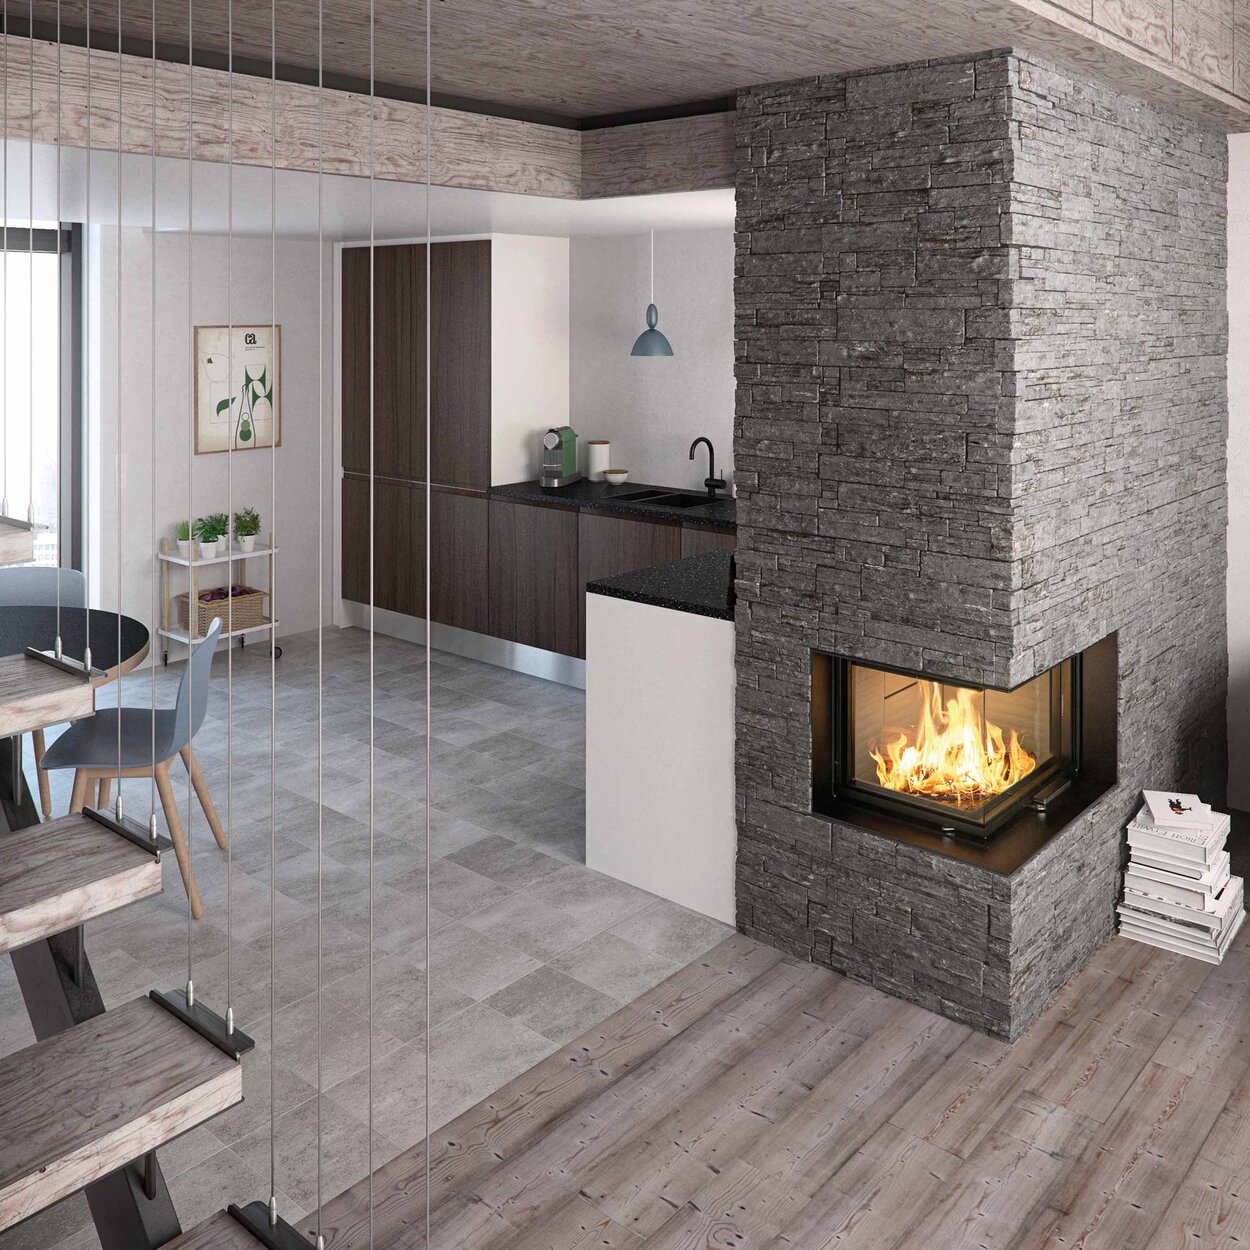 Wood fireplace VISIO 2 right, the corner fireplace separates the kitchen and living room and a modern staircase leads to the upper floor